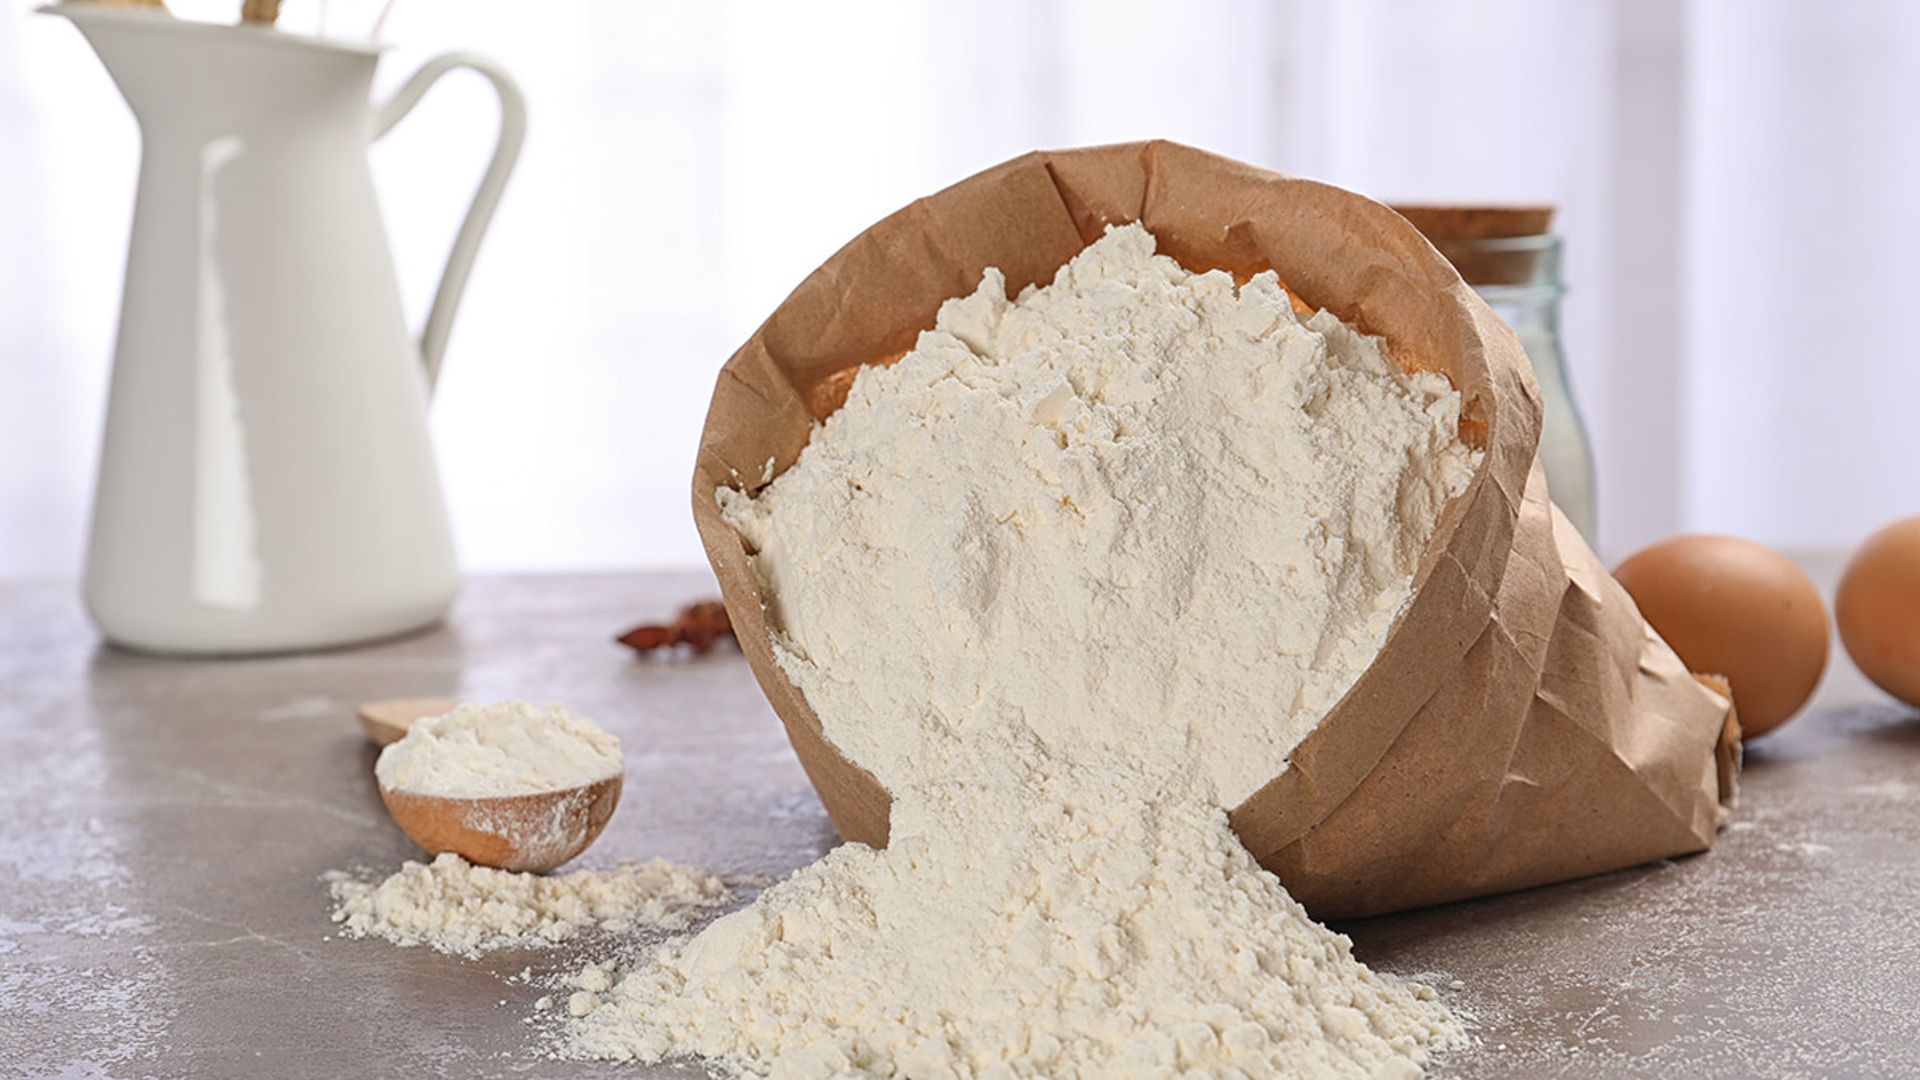 Where to buy flour for baking during lockdown